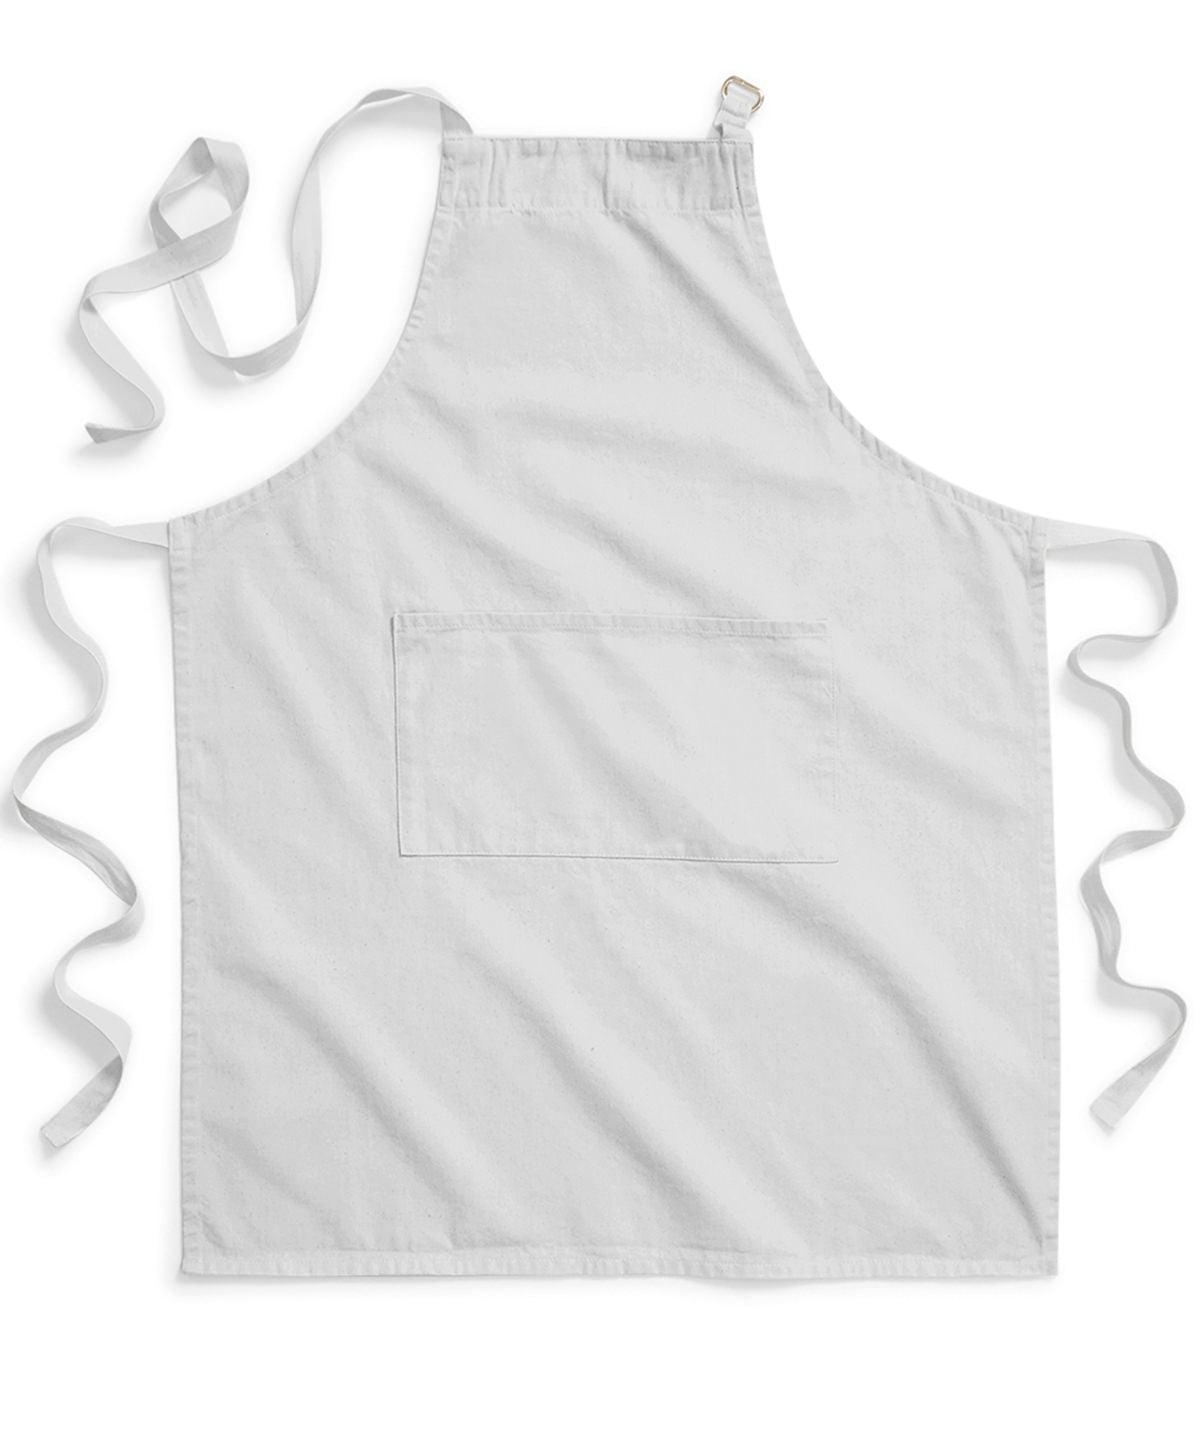 Light Grey - Fairtrade cotton adult craft apron Aprons Westford Mill Aprons & Service, New Colours For 2022, Organic & Conscious, Workwear Schoolwear Centres